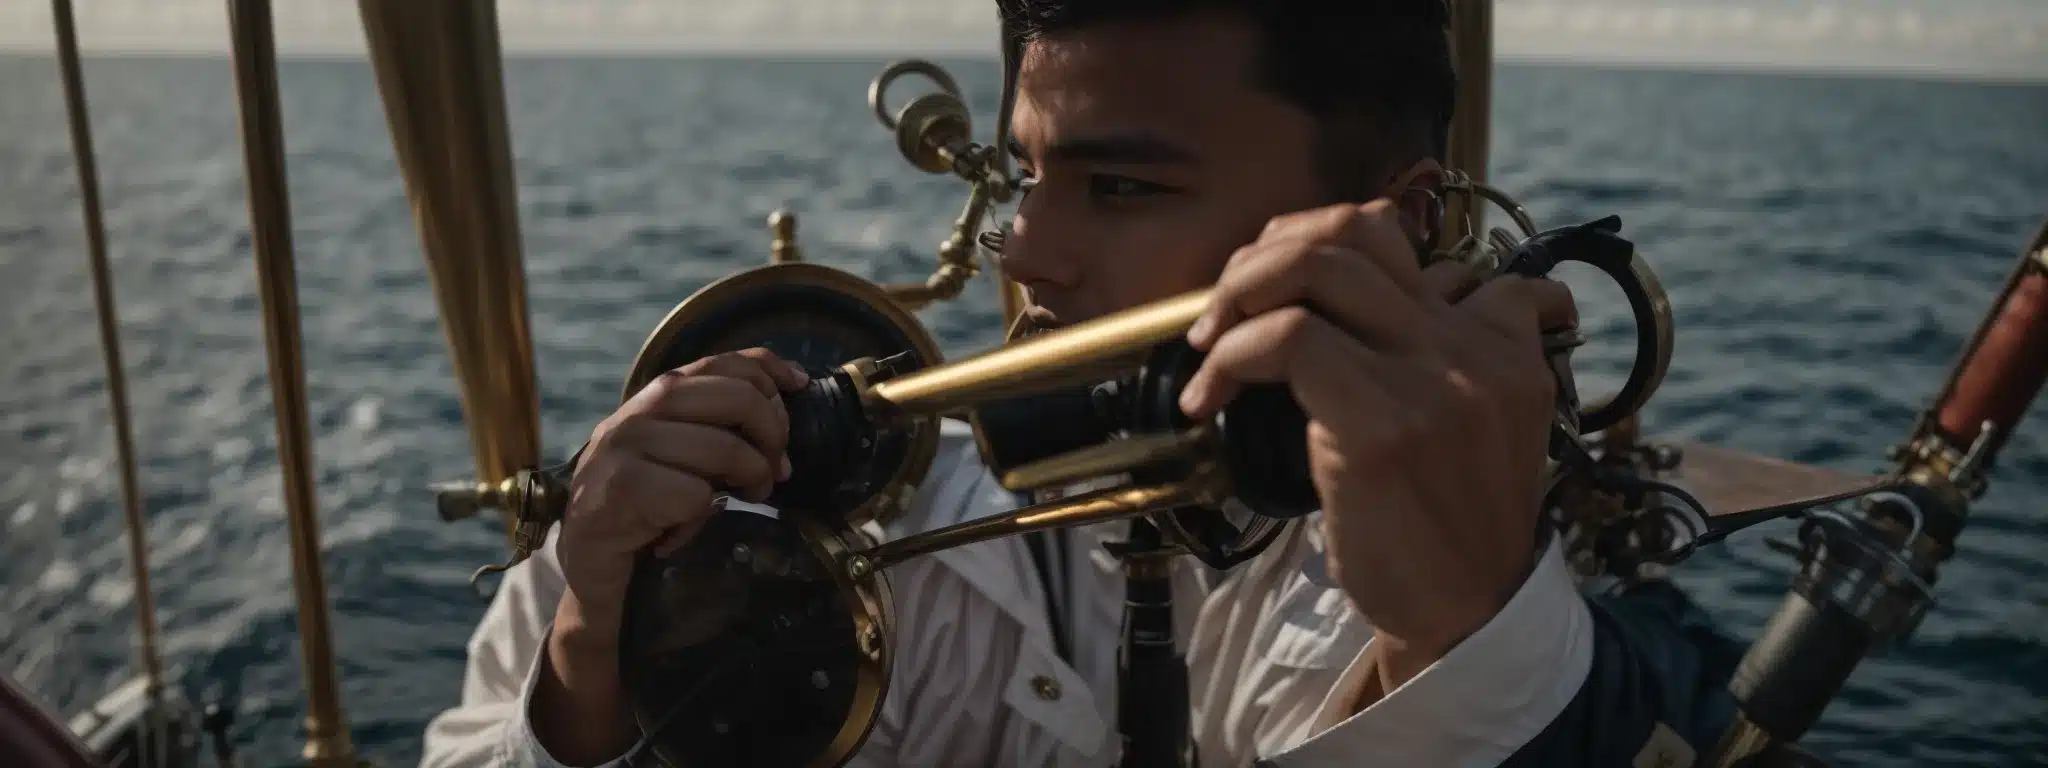 A Sailor Using A Brass Sextant By The Helm Of A Ship, With Open Waters Stretching To The Horizon.